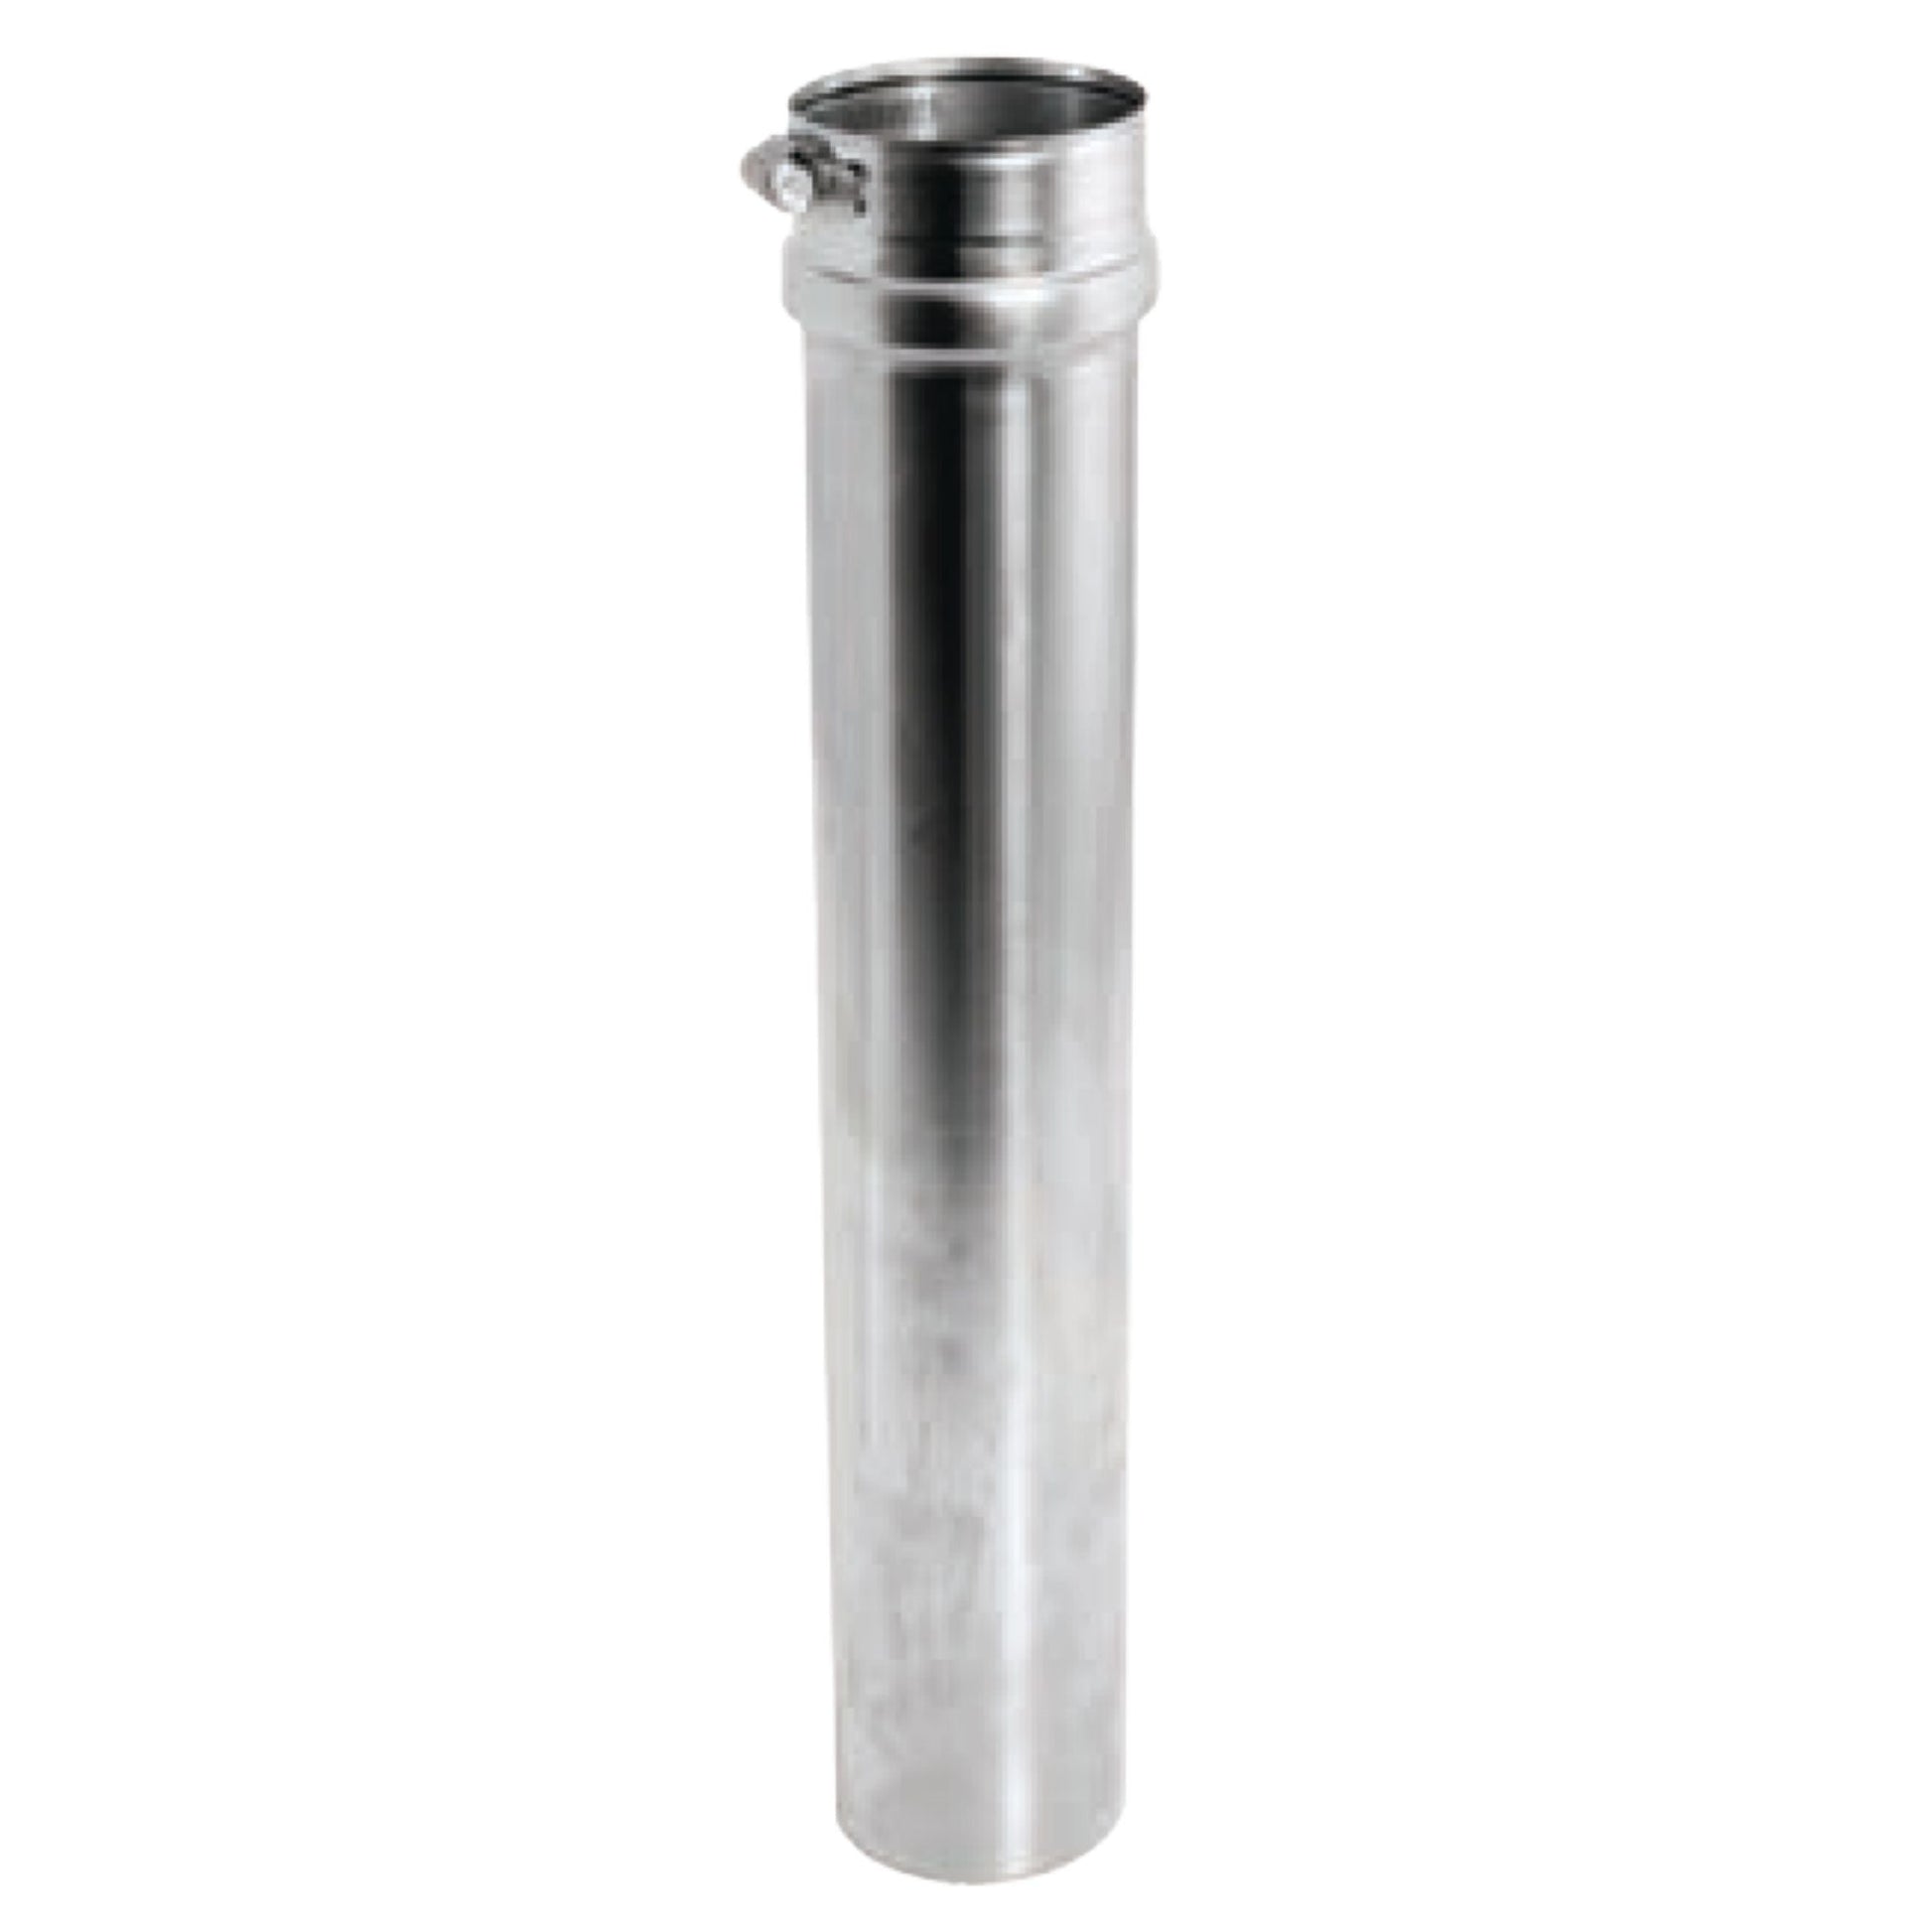 DuraVent FasNSeal 10" x 18" 316L Stainless Steel Adjustable Vent Length